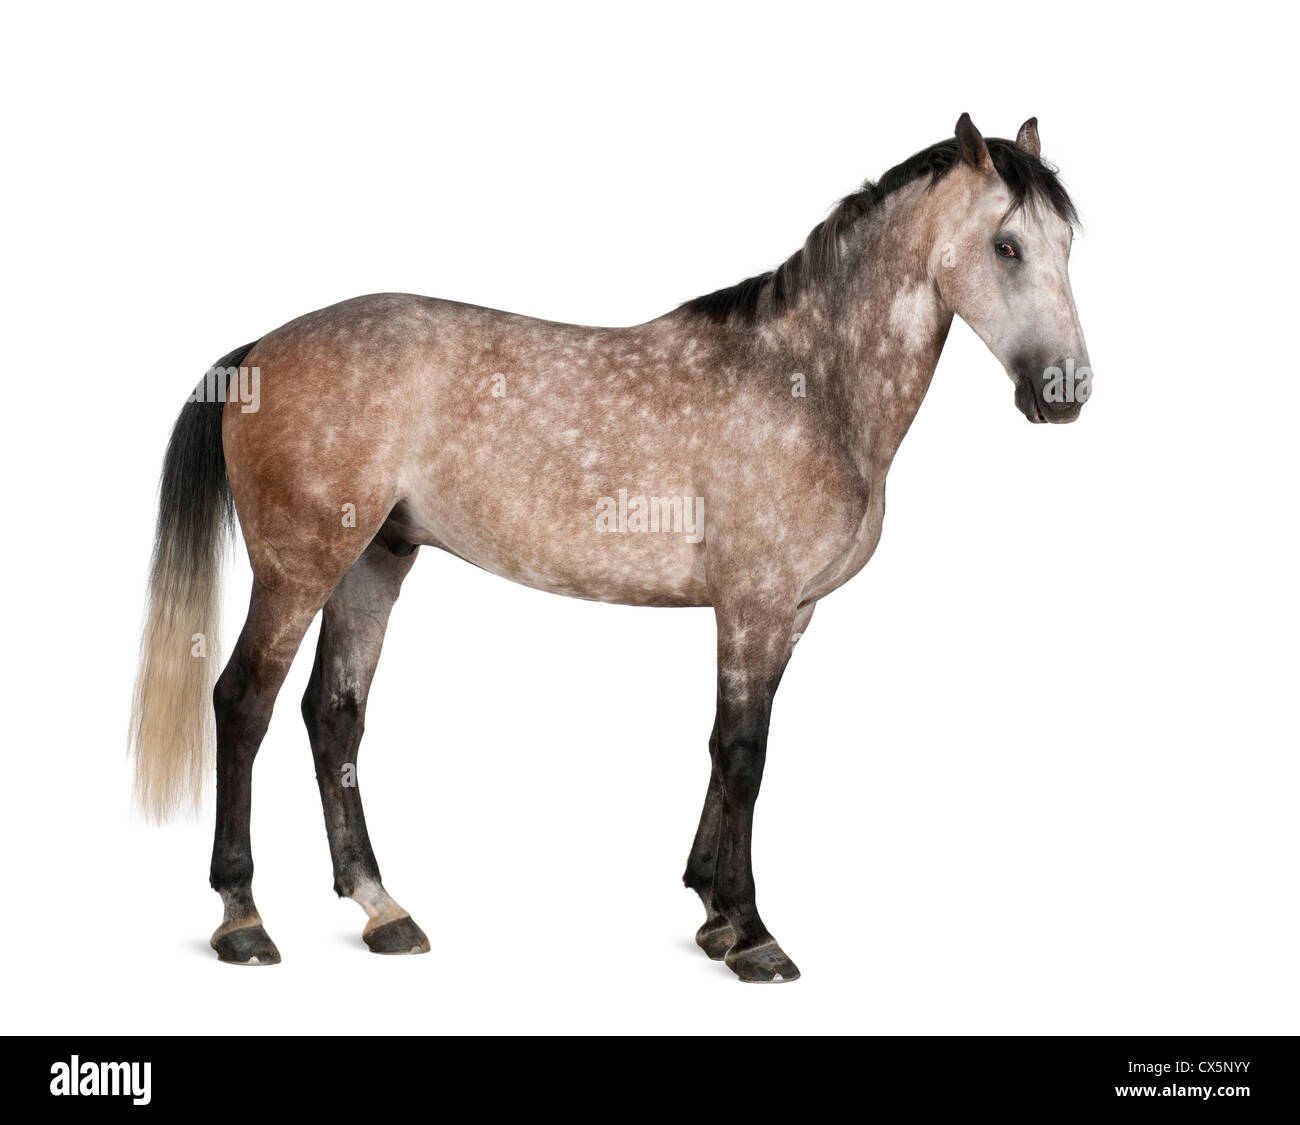 Cheval Warmblood belge, 6 ans, standing against white background Banque D'Images